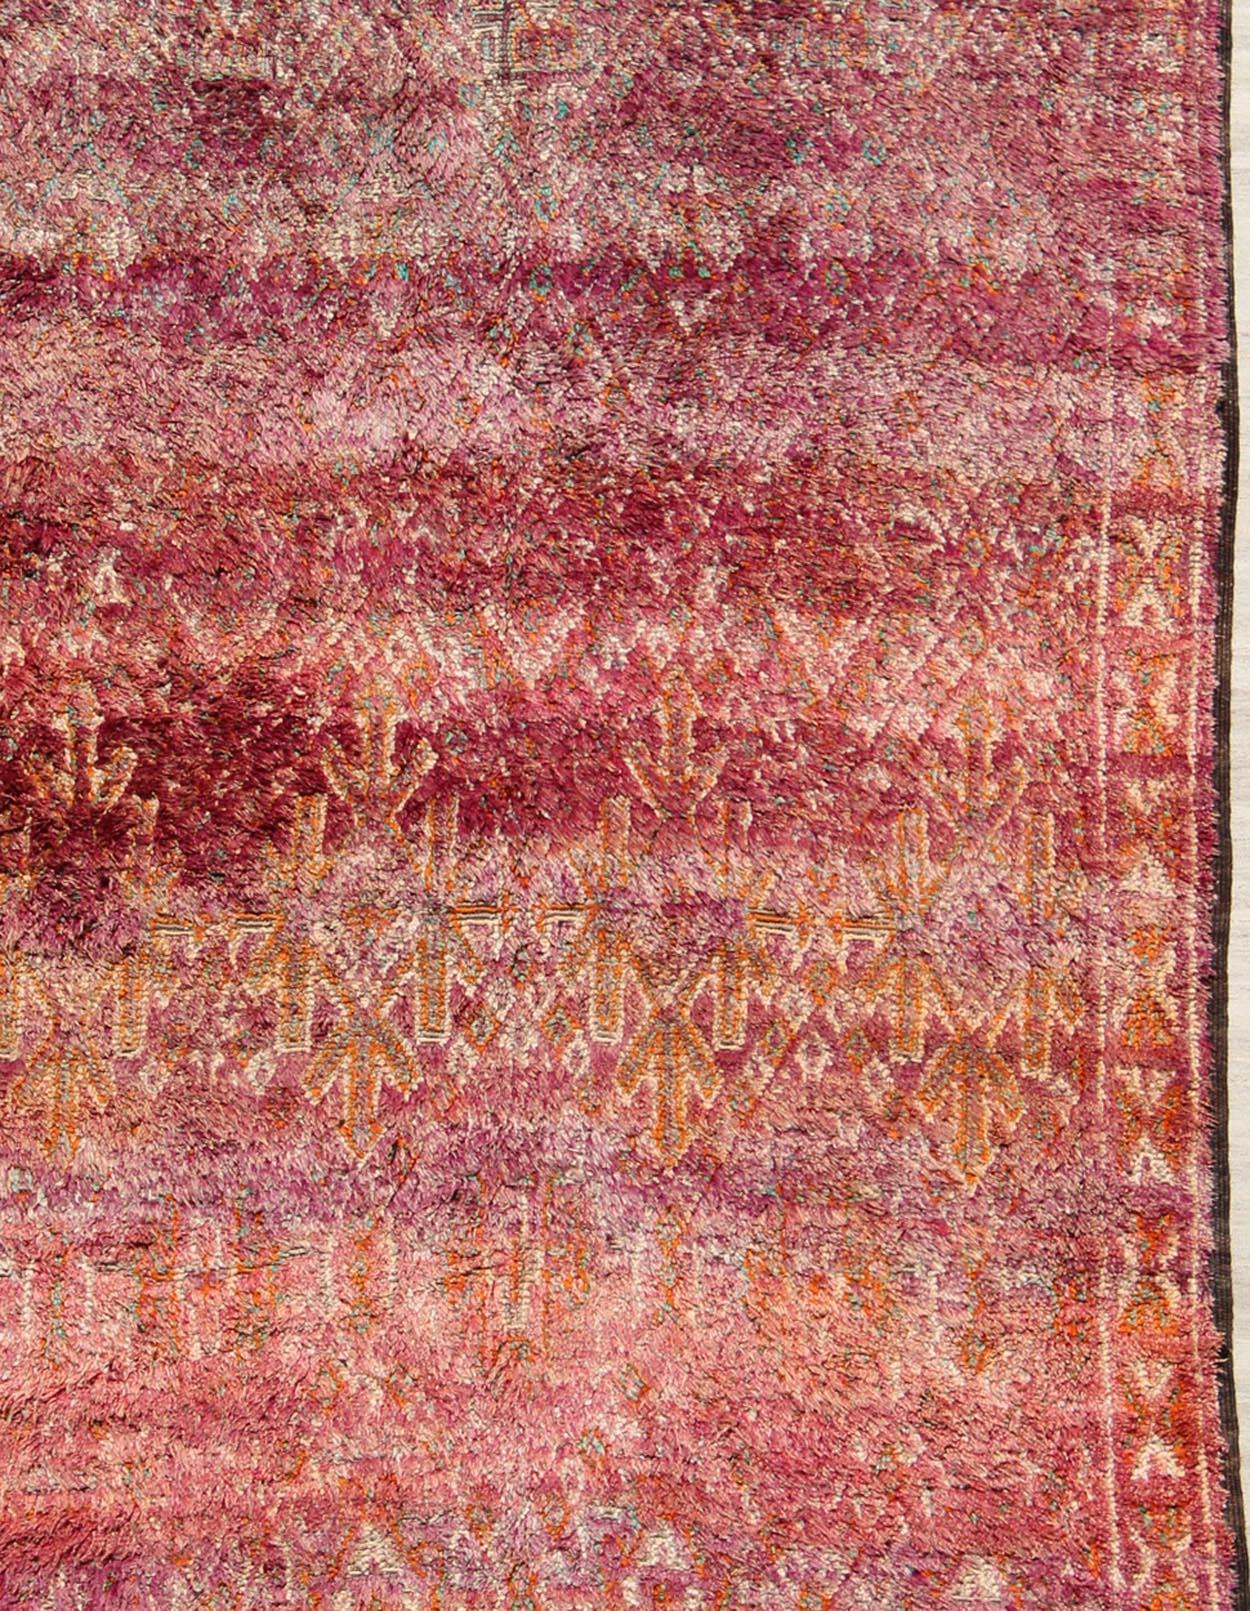 Tribal design Moroccan Vintage rug in Purple, Red, Orange, and Green rug KBE-LCB-18-22, country of origin / type: Morocco / Tribal, circa 1940.

This gorgeous vintage Moroccan carpet from the mid-20th century displays a stunning, all-over